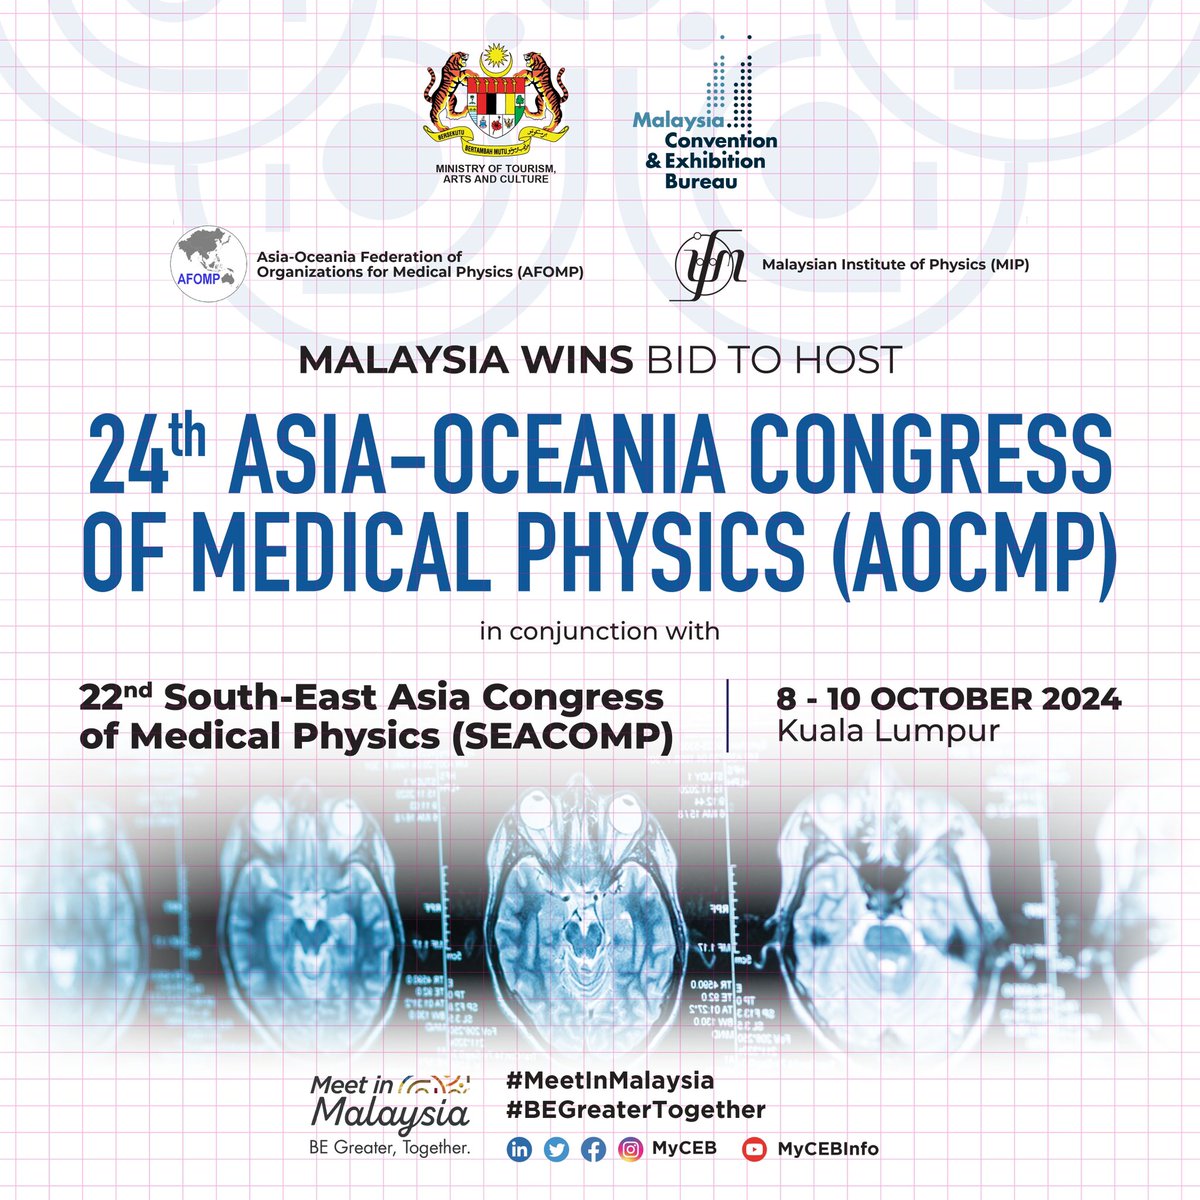 Malaysia is set to host the 24th Asia-Oceania Congress of Medical Physics (AOCMP) in conjunction with the 22nd South-East Asia Congress of Medical Physics (SEACOMP), a gathering of medical physics profession from around the globe. 
Read more at linkedin.com/posts/myceb_my…